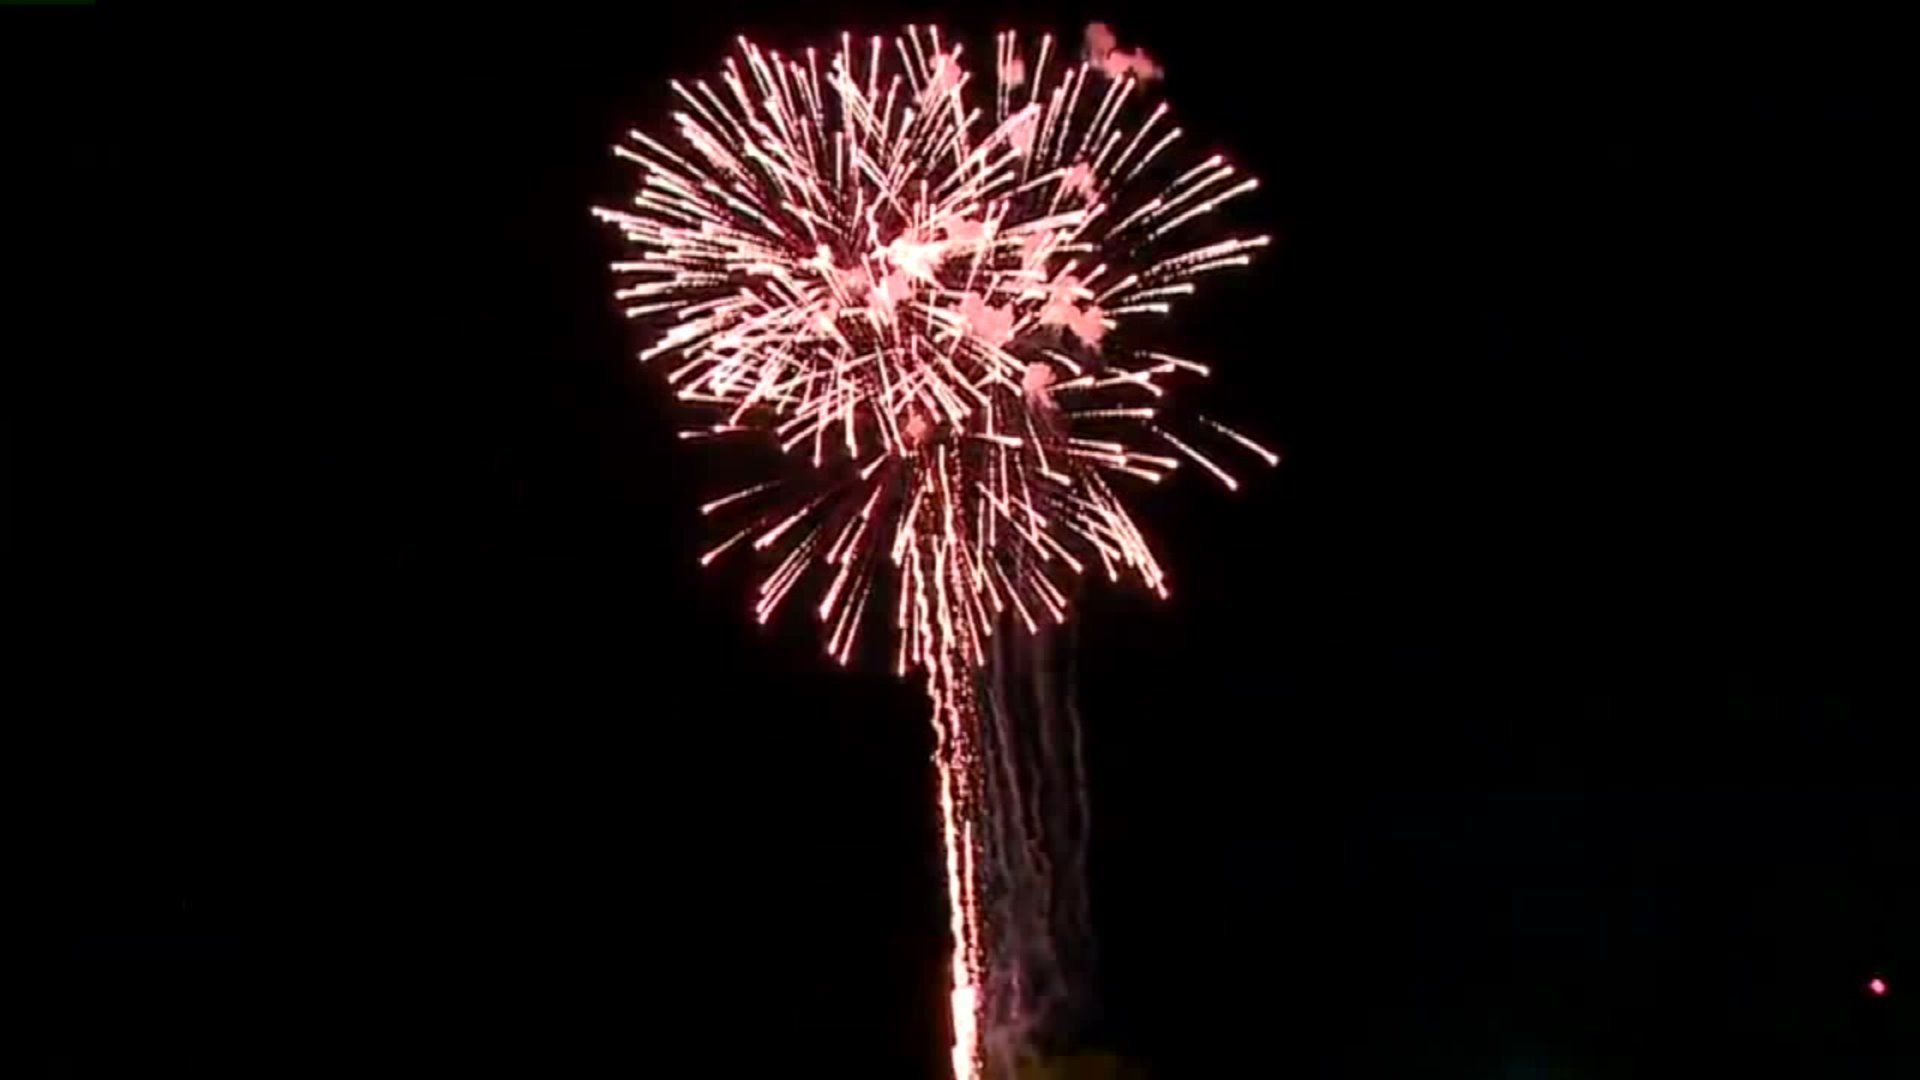 CarmelFest returns, celebrates July 4th with 2 nights of fireworks